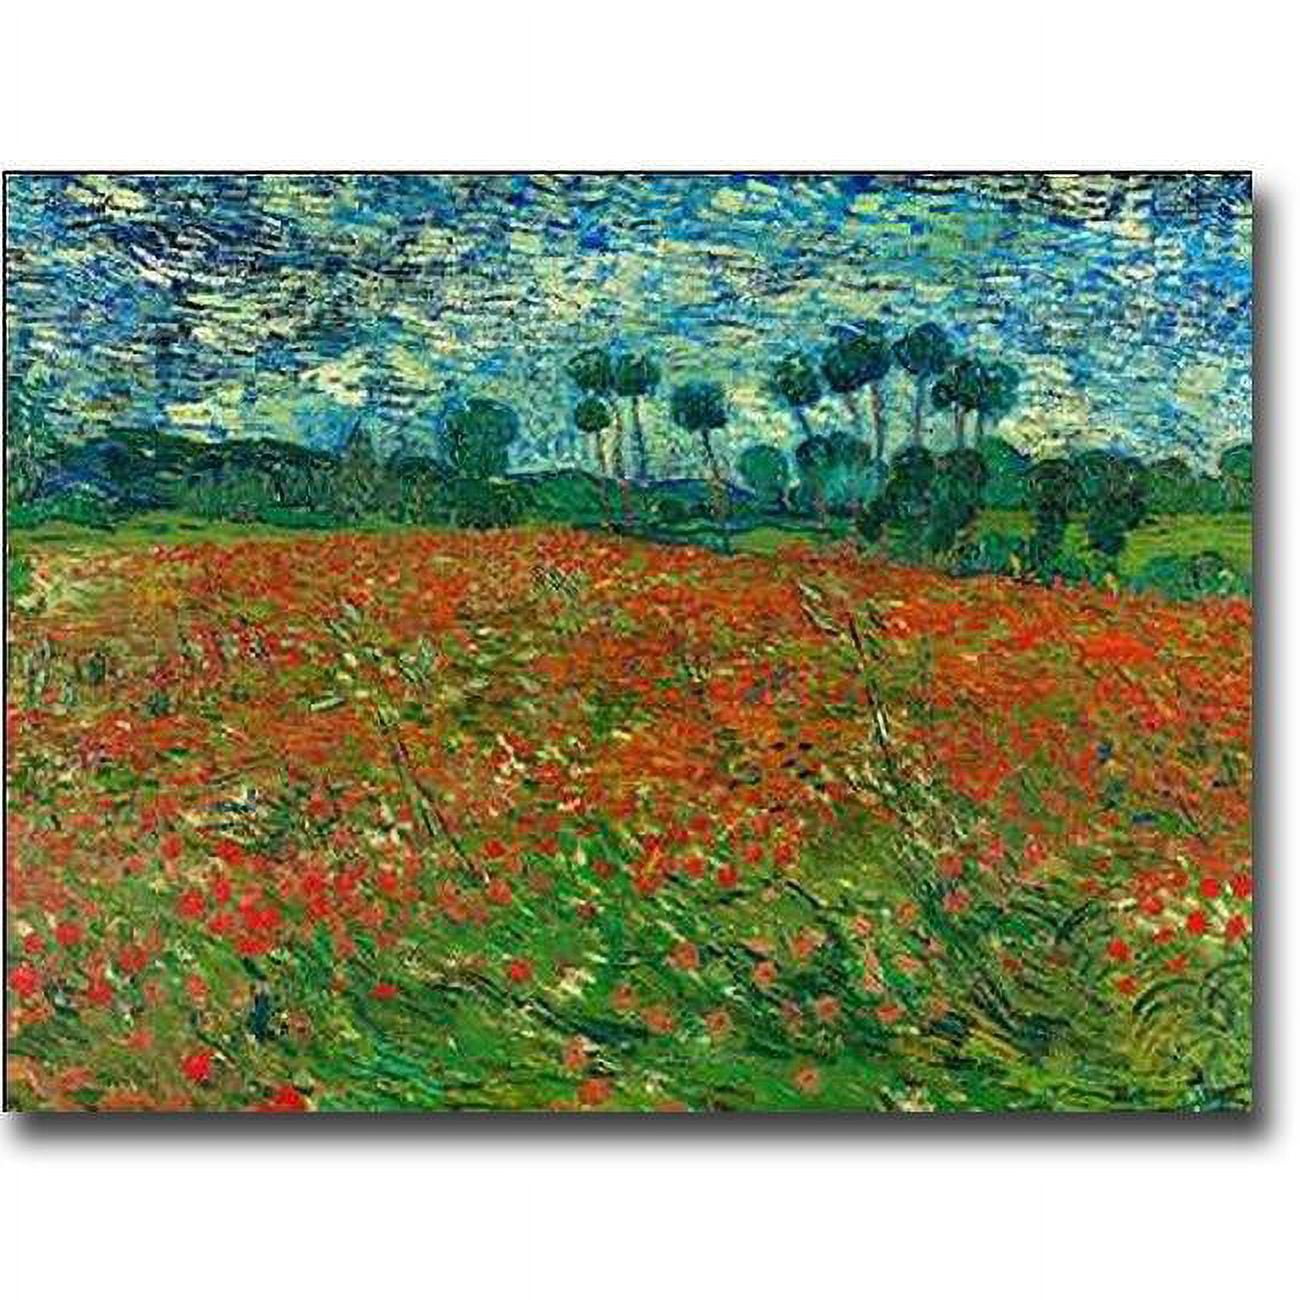 1216am287sag Poppy Field By Vincent Van Gogh Premium Gallery-wrapped Canvas Giclee Art - 12 X 16 X 1.5 In.